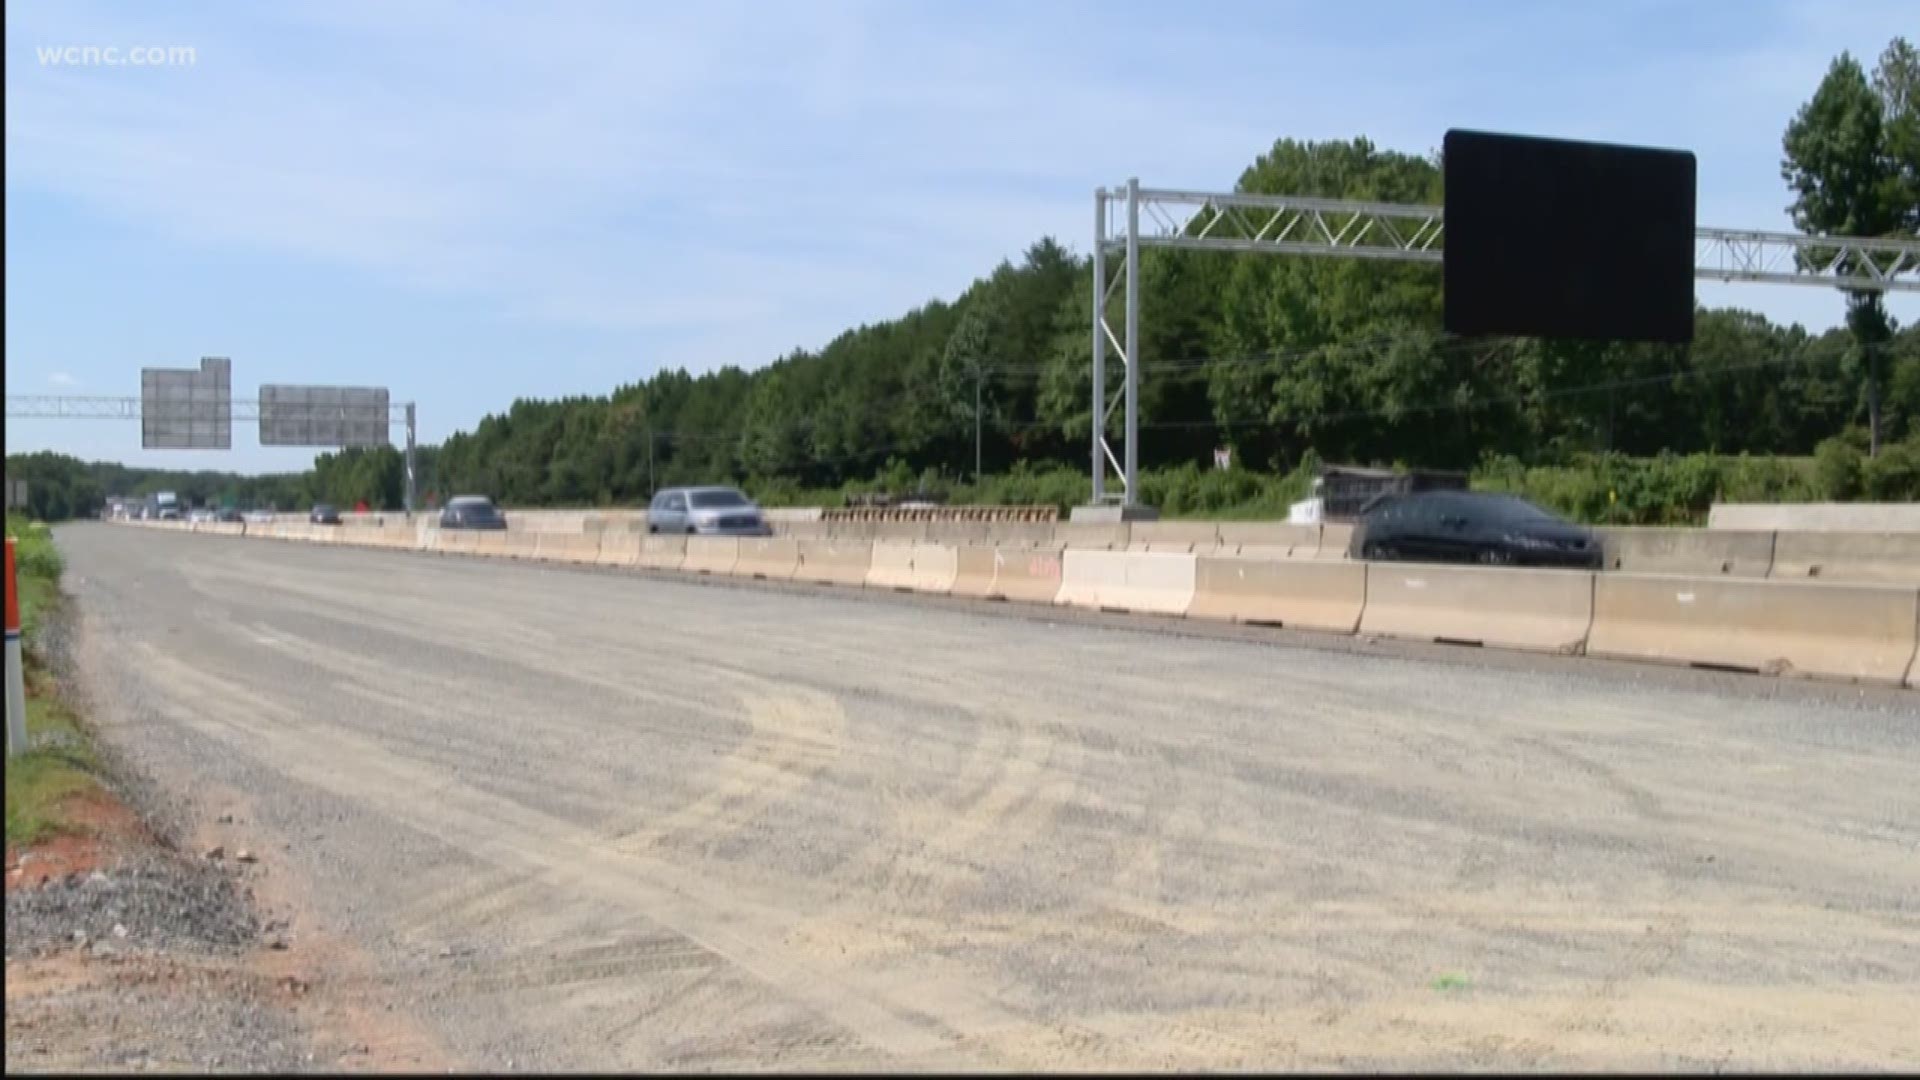 State engineers think opening up shoulder lanes during rush hour could improve traffic. The lanes would open during peak periods to help local traffic between interchanges.